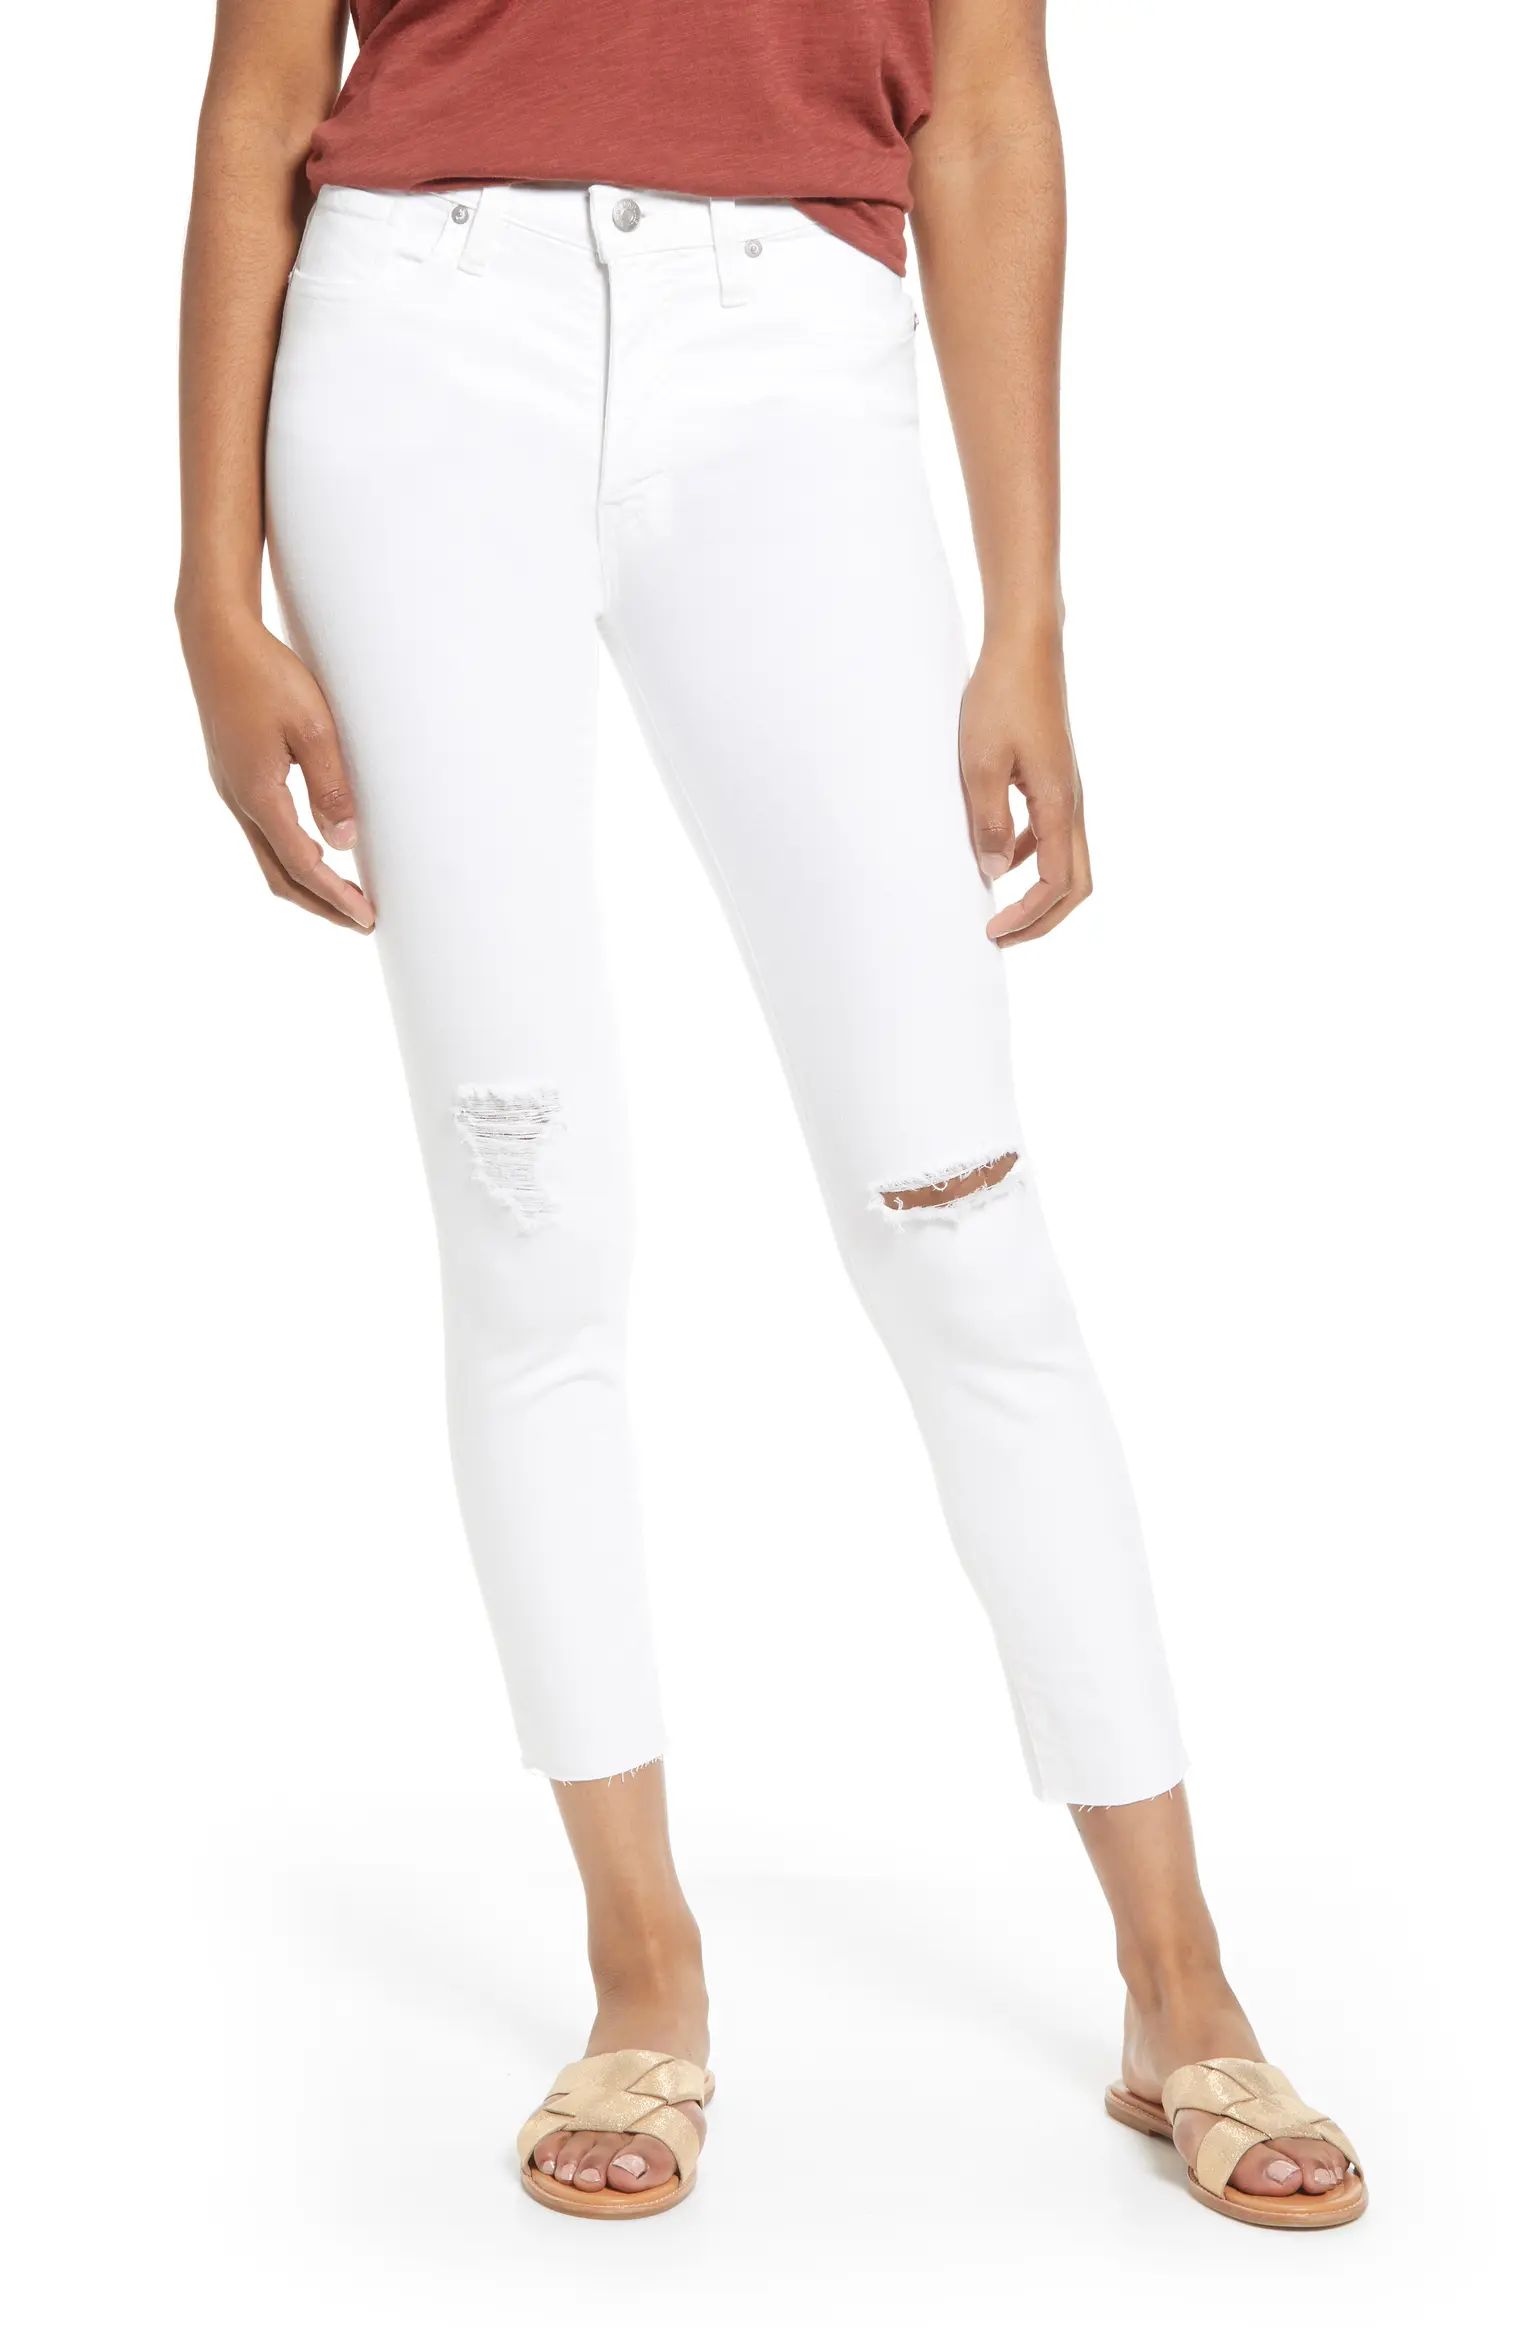 9-Inch Ripped High Waist Crop Skinny Jeans | Nordstrom